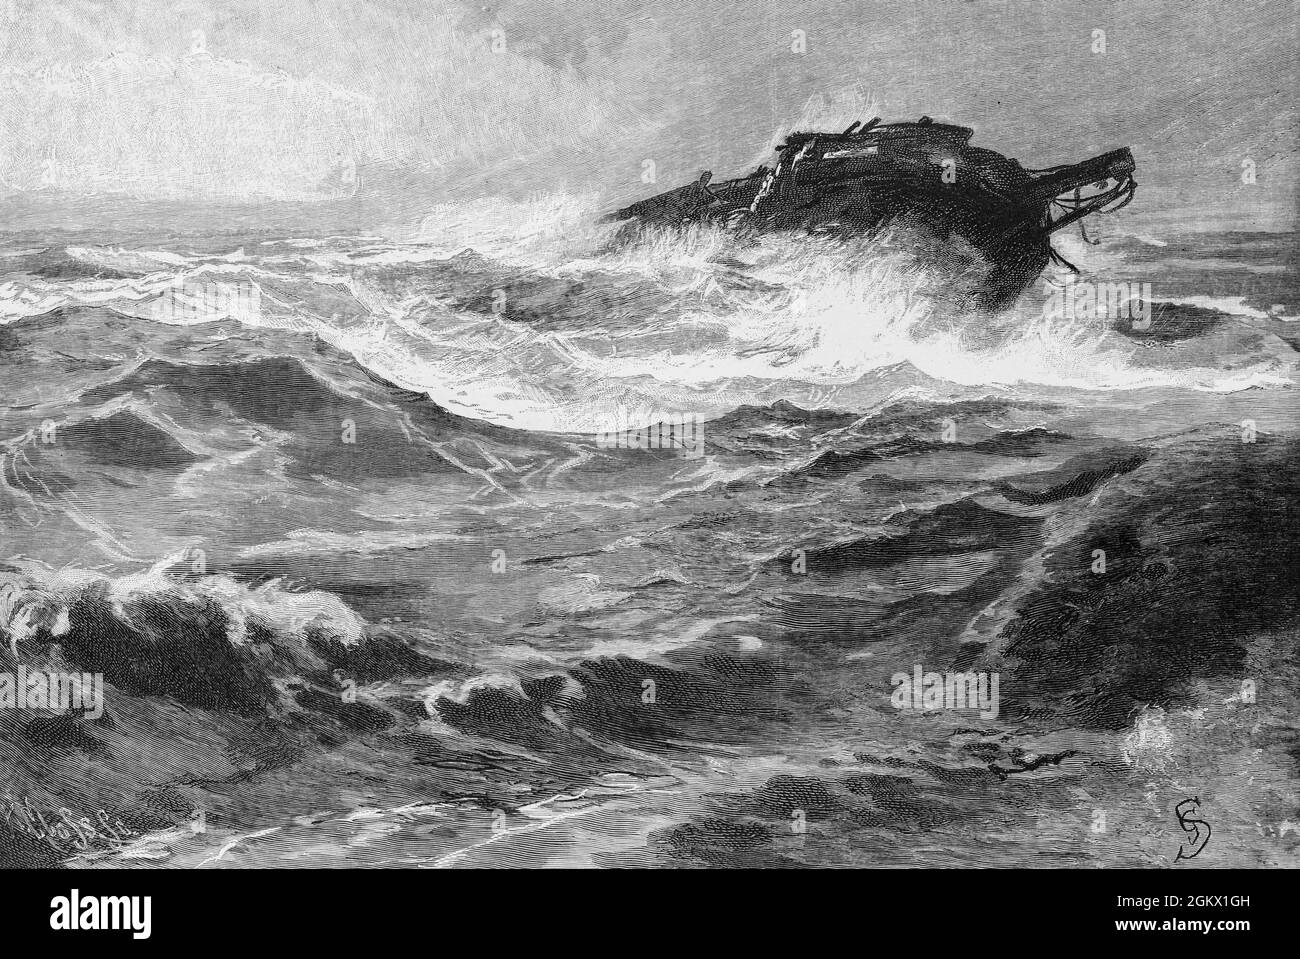 After the storm, a shipwreck drifting ashore in the East Frisian North Sea coast, Lower Saxony, North Germany, historical illustration 1880, Stock Photo